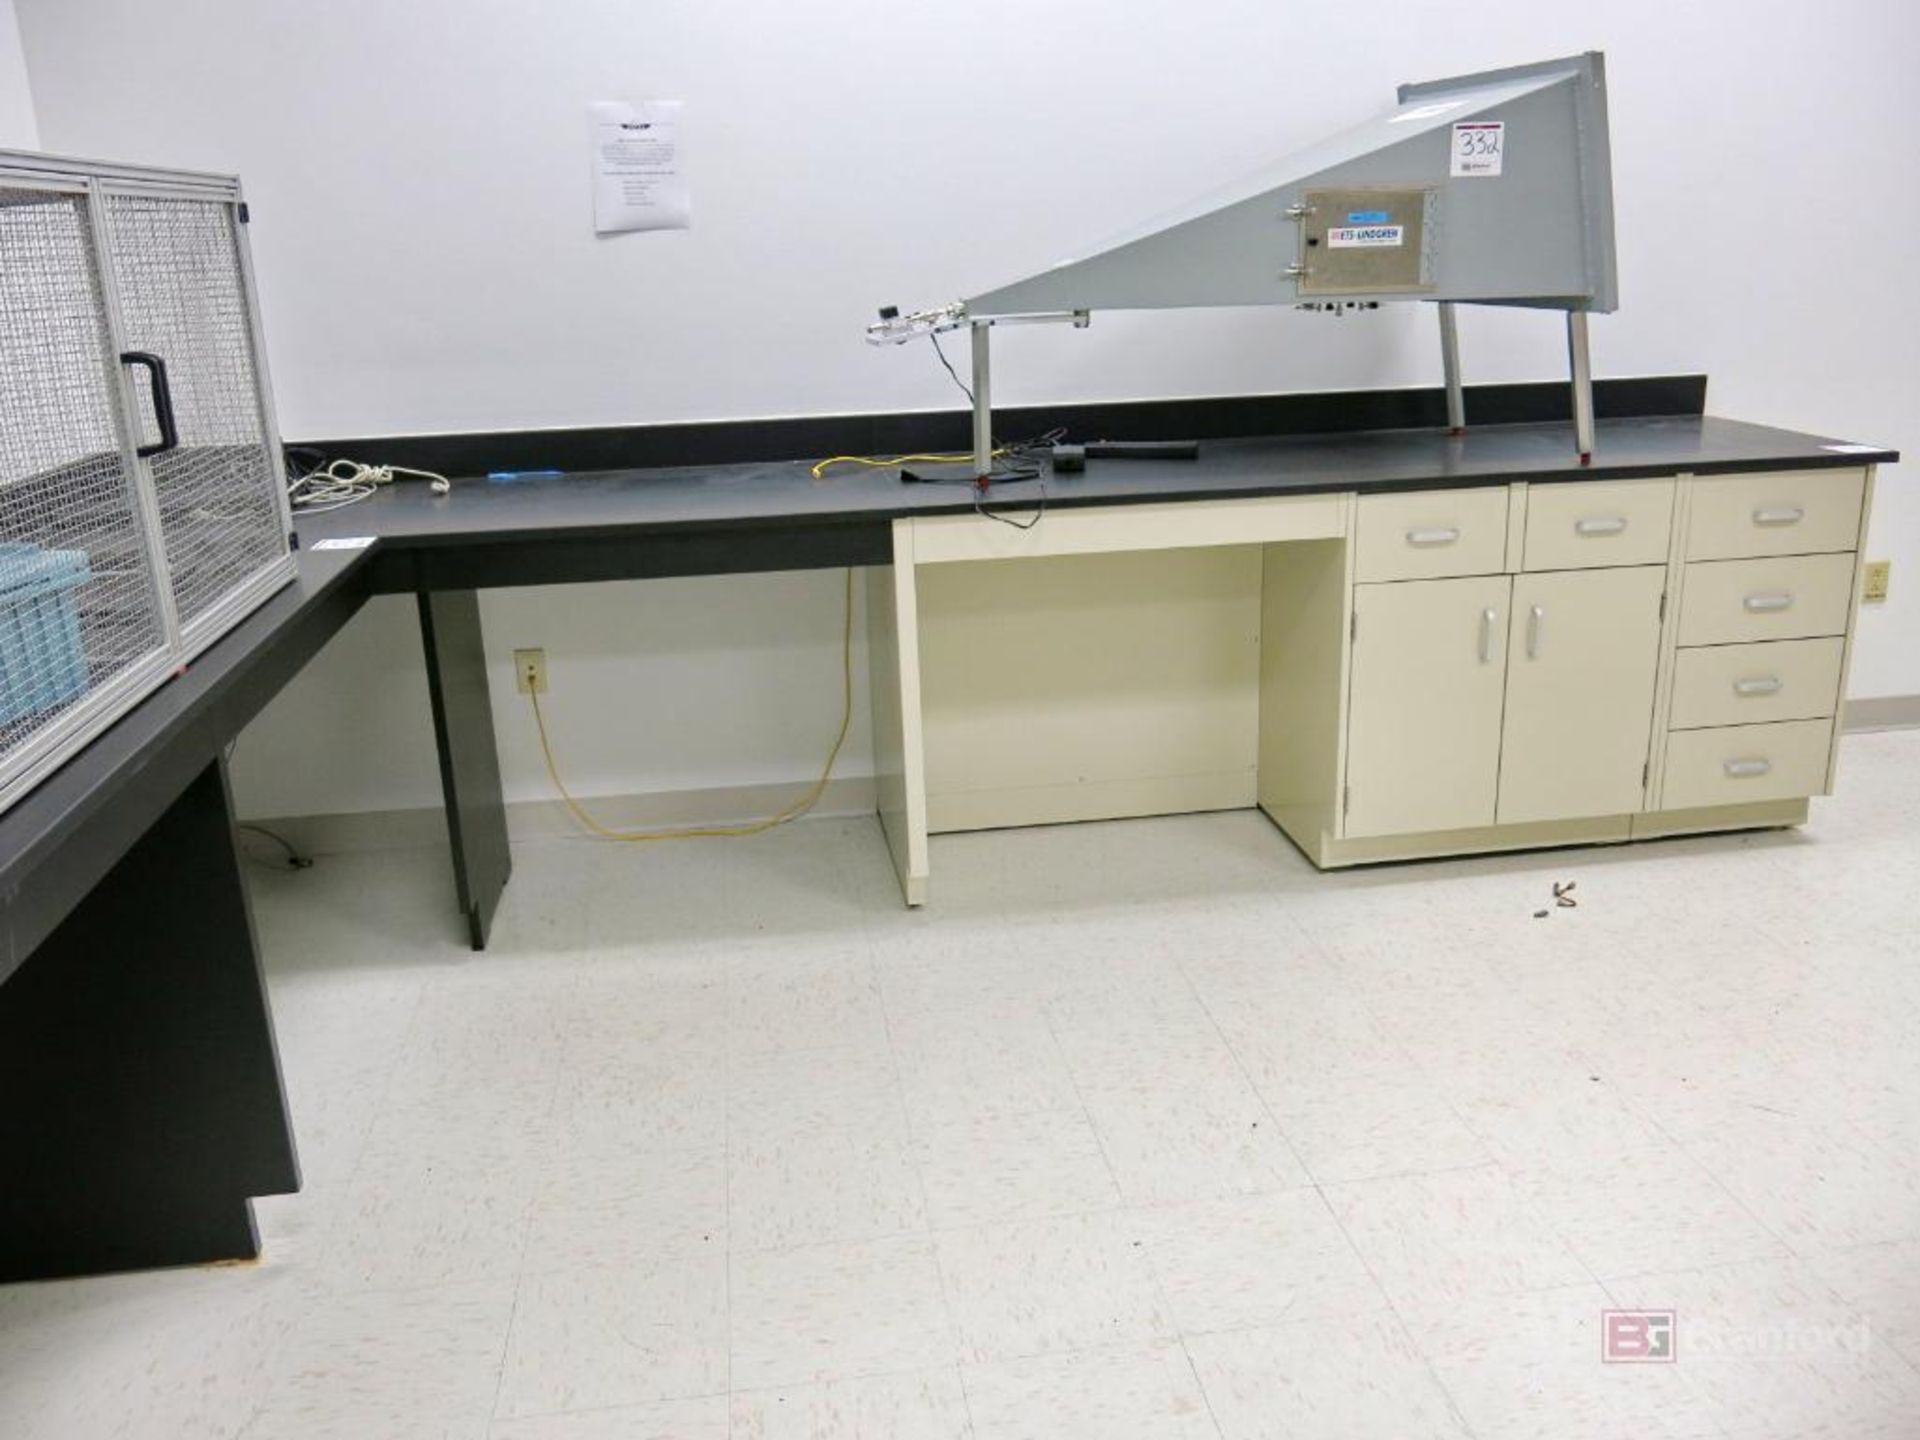 Large Lot of Modular Soapstone Top Laboratory Work Benches - Image 2 of 5